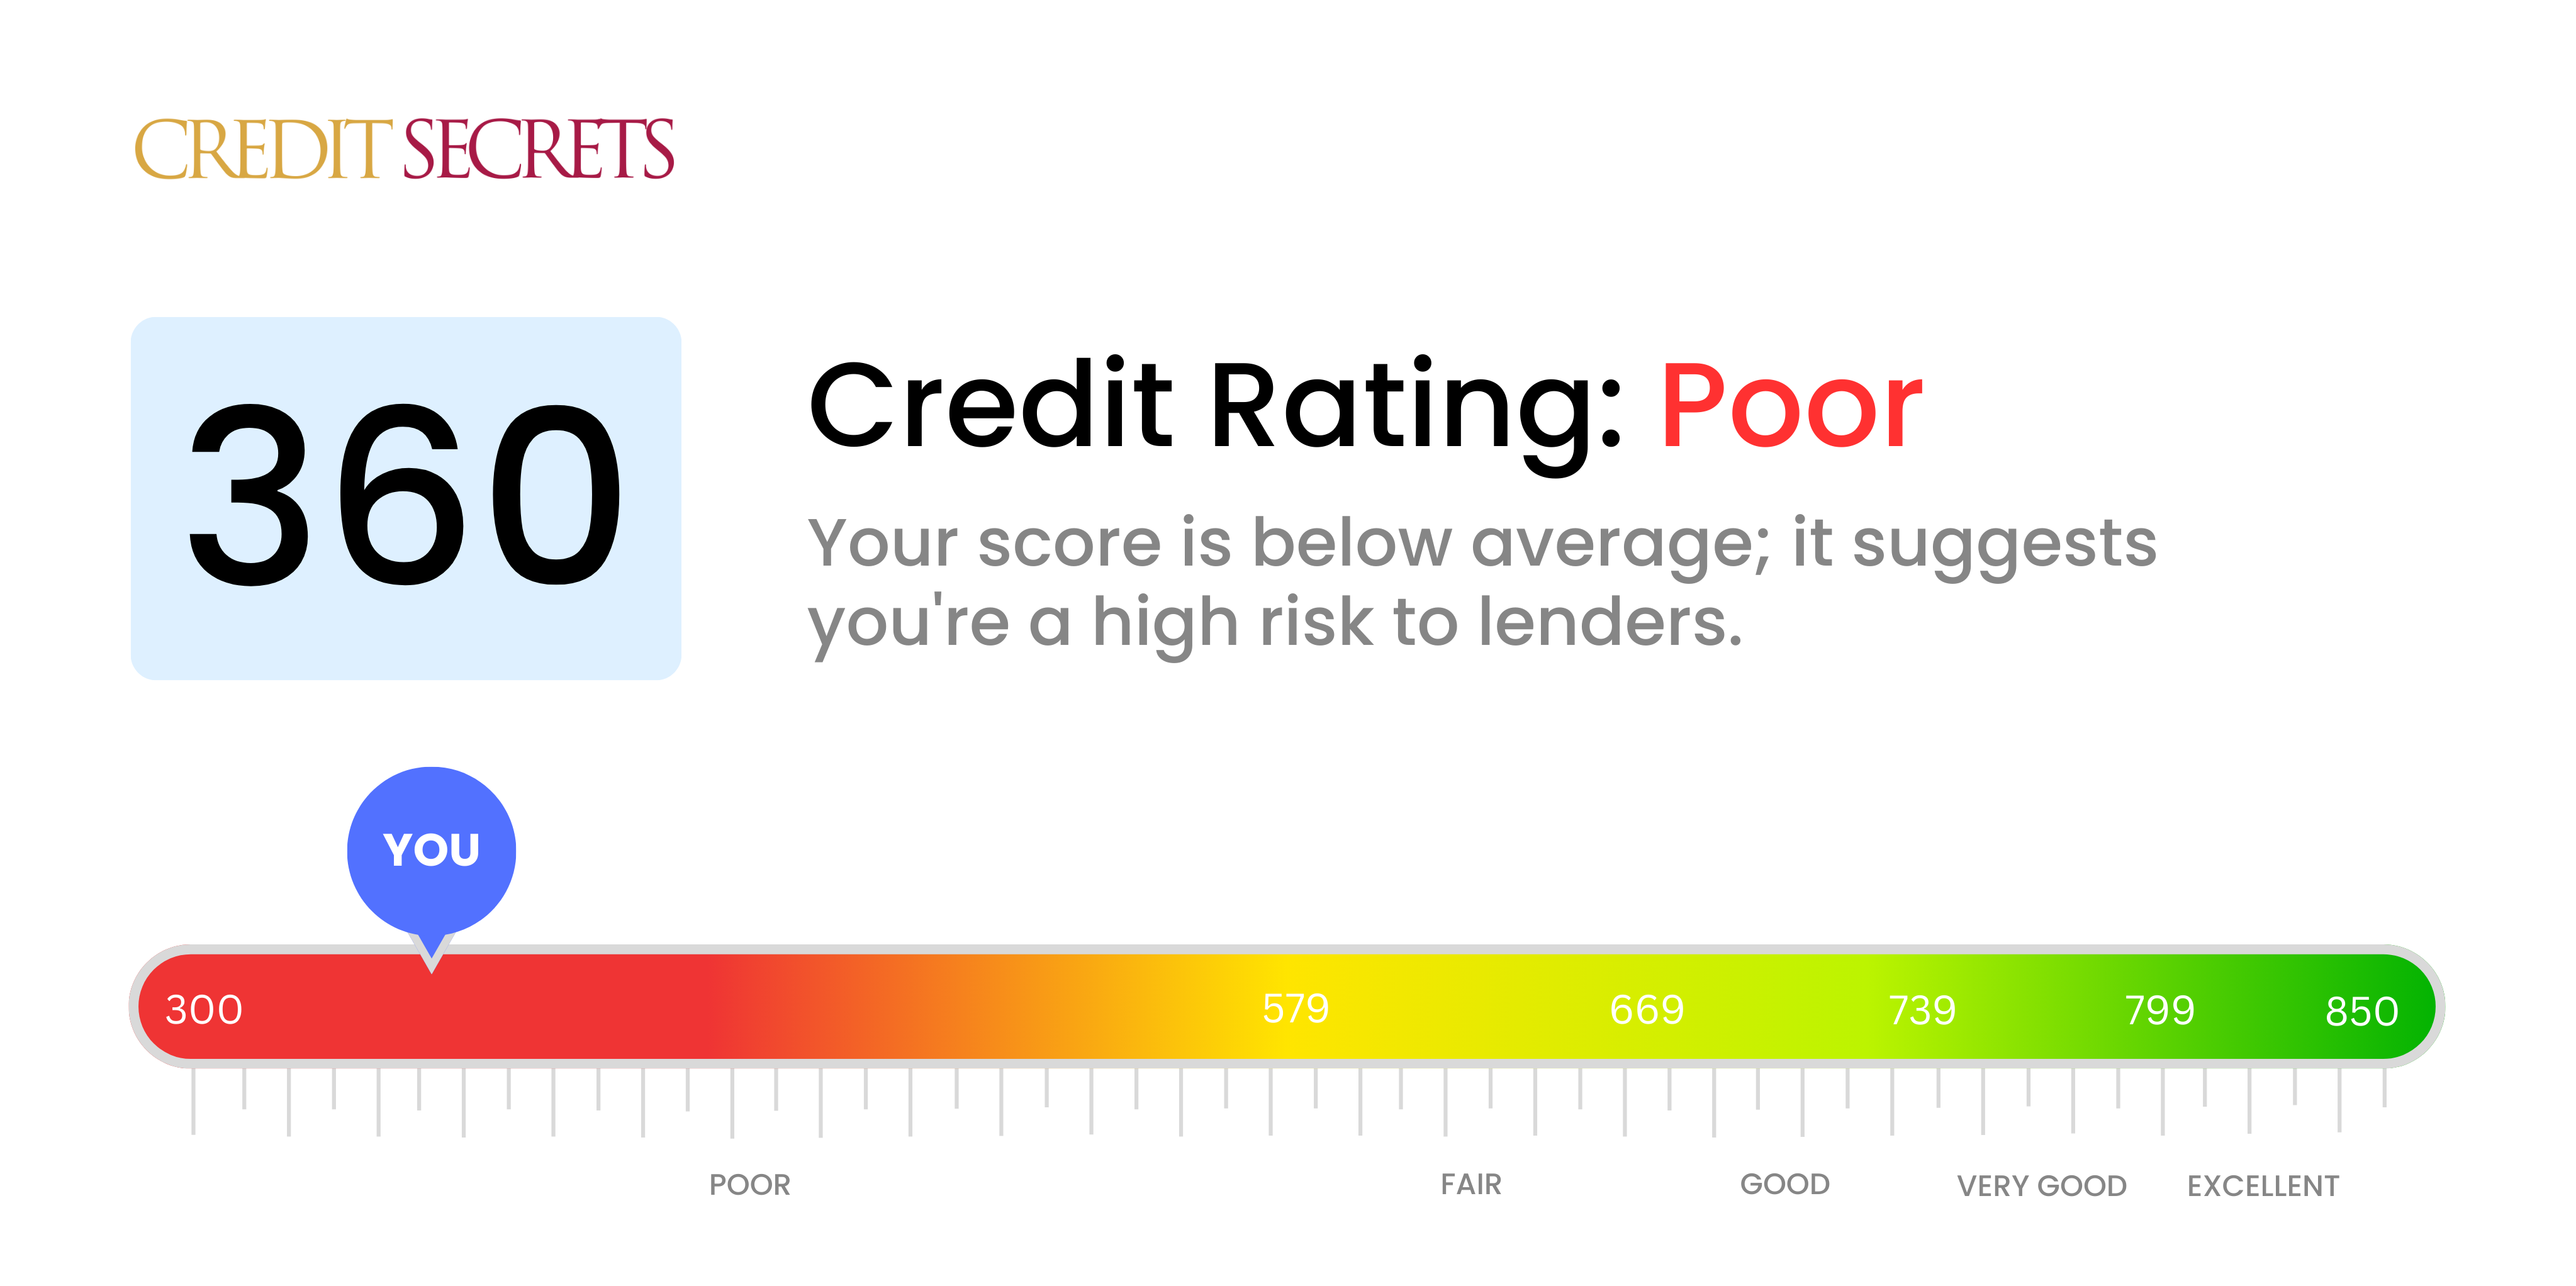 Is 360 a good credit score?